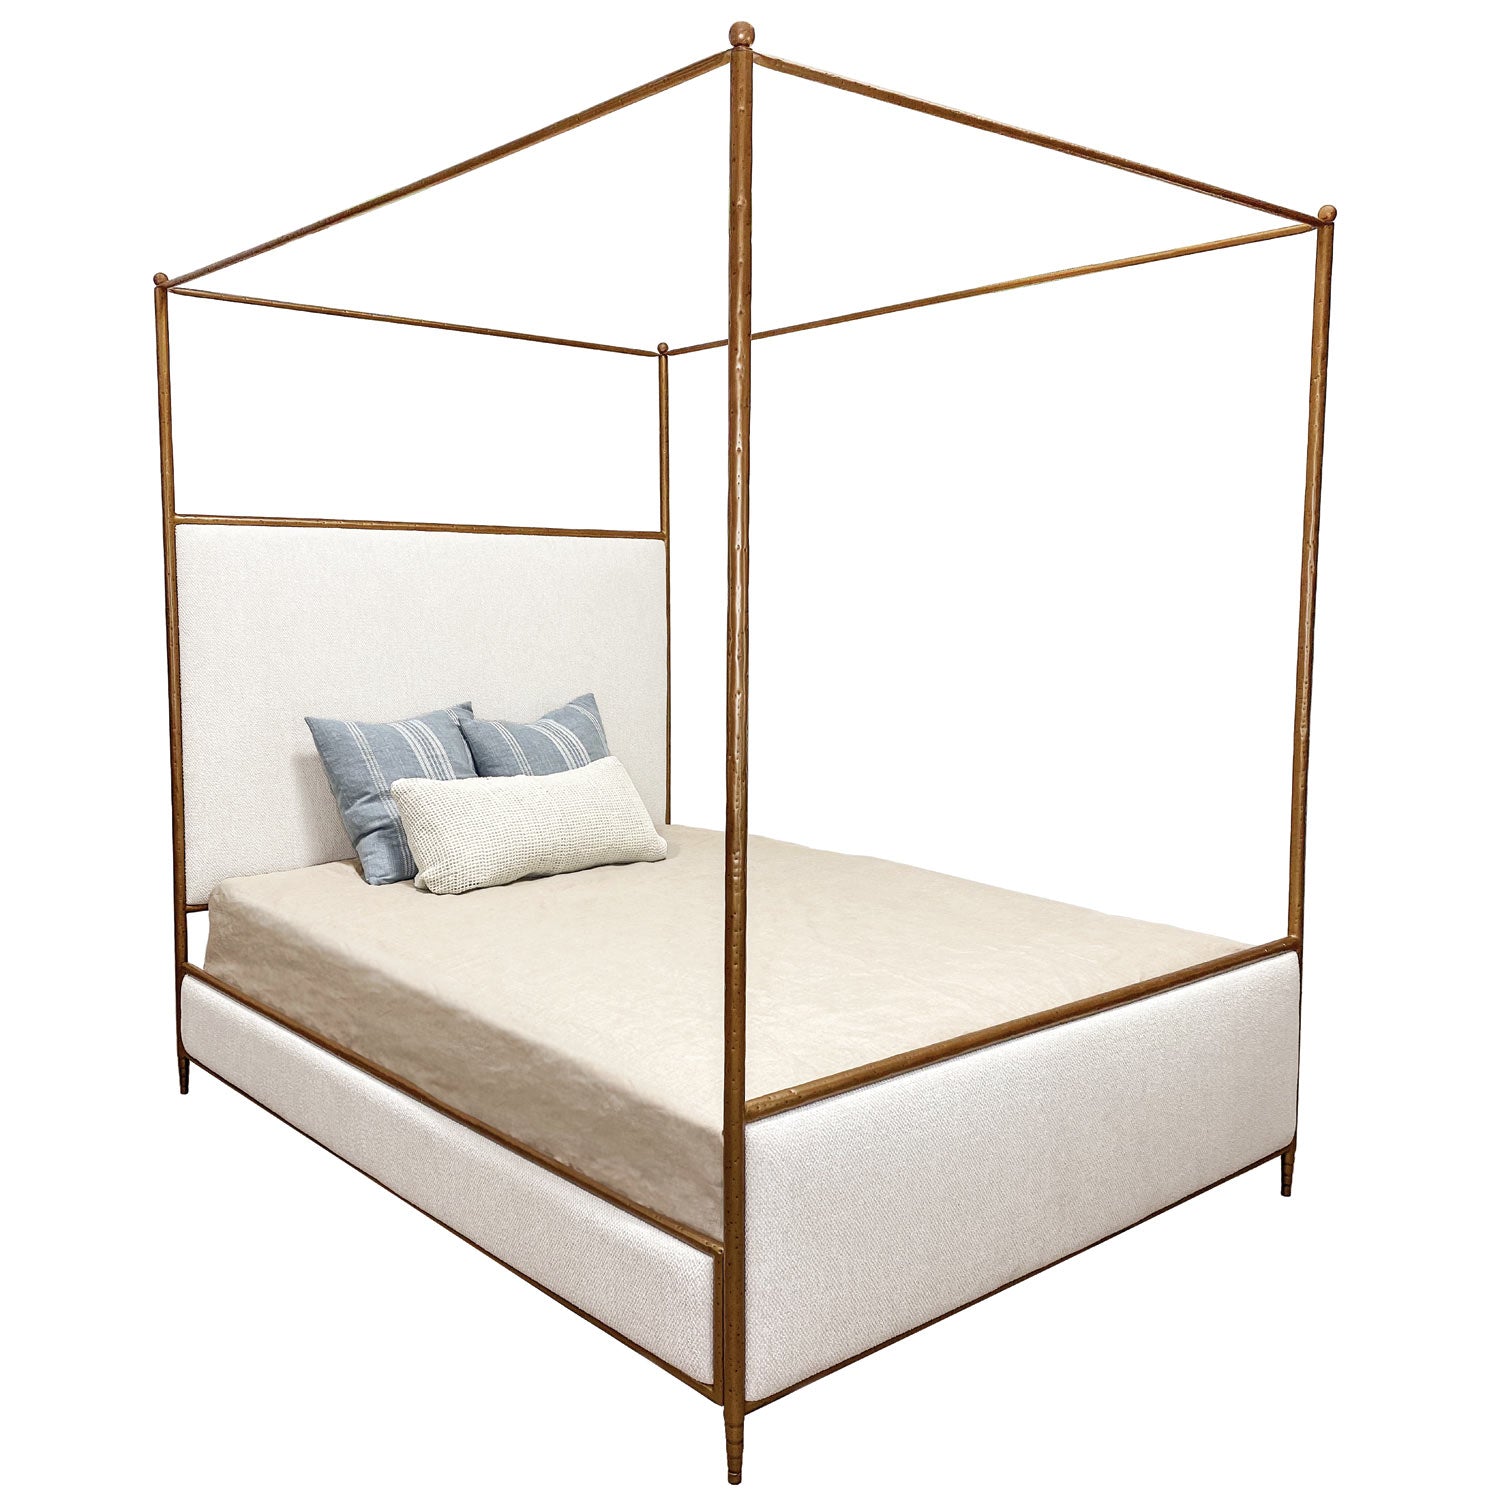 Royce Hammered Iron Upholstered Canopy Bed Upholstered Sides Frame 1208 Wesley Allen Queen CBC- FS-WS Hammered Copper Finish French Ivory Fabric Matriae